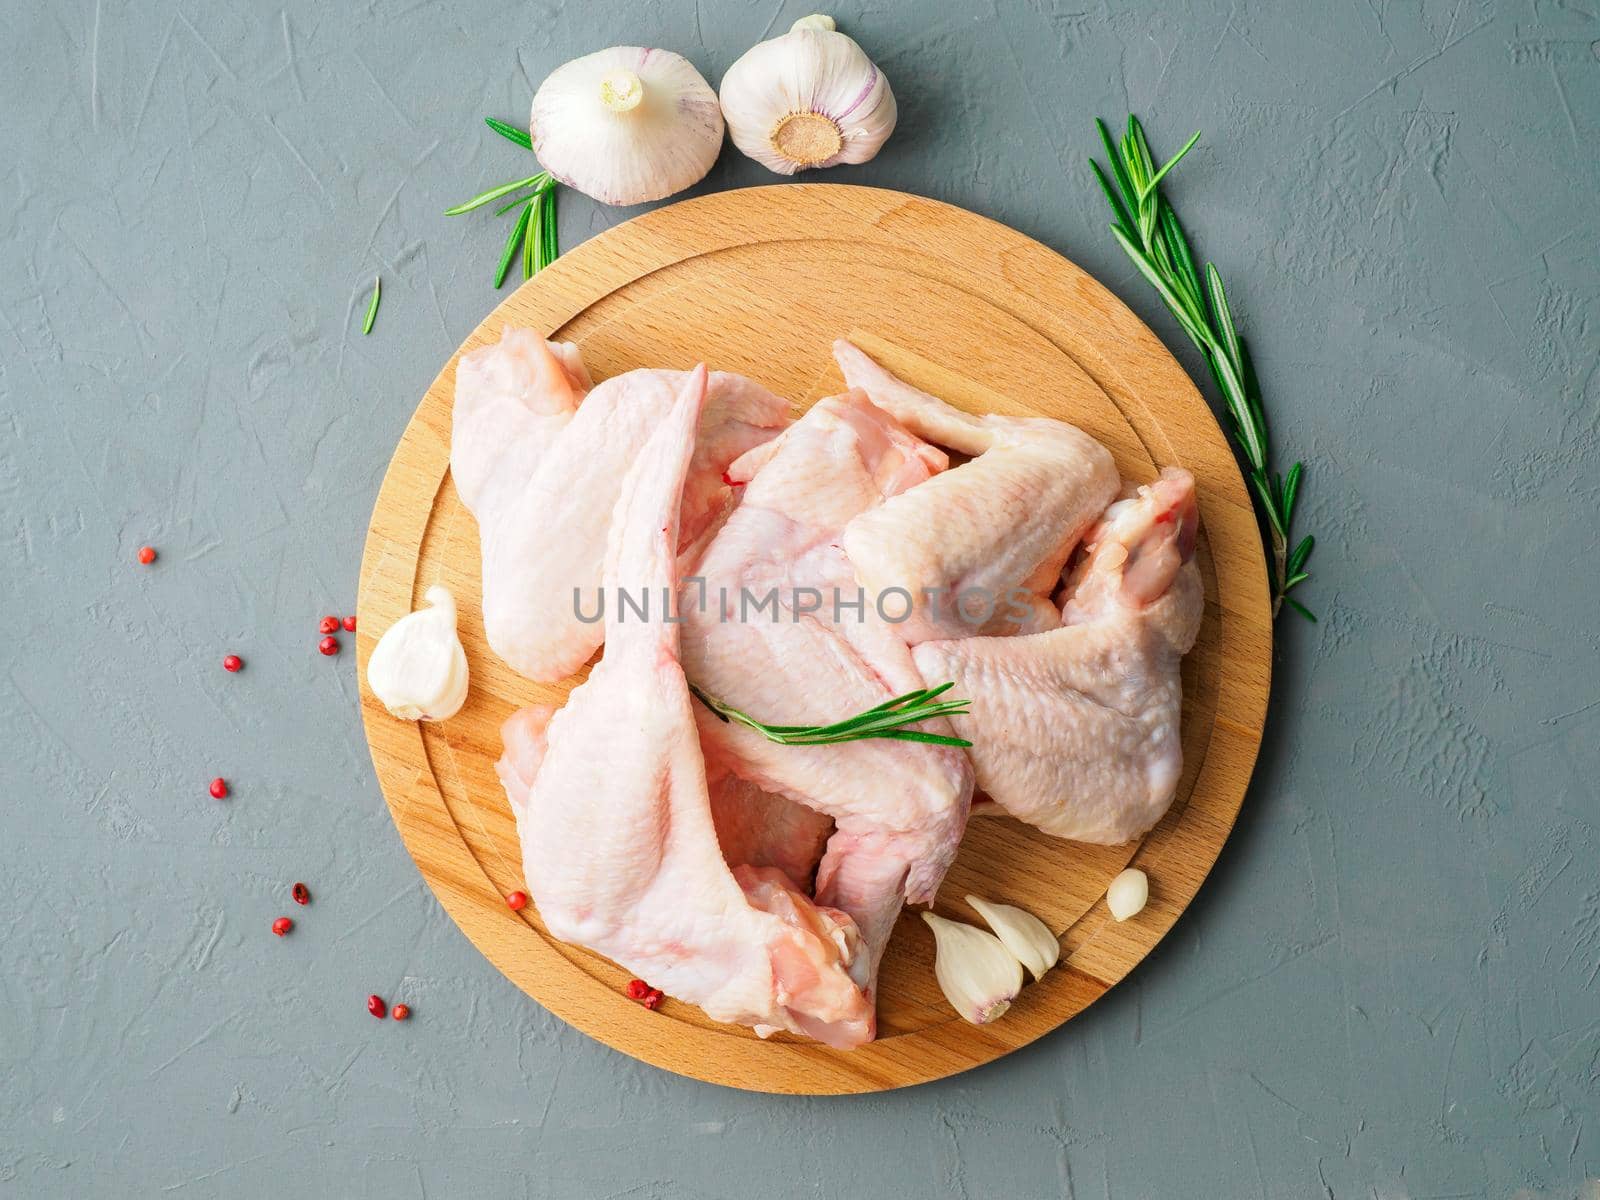 raw fresh chicken wings on wooden board, grey concrete background, top view